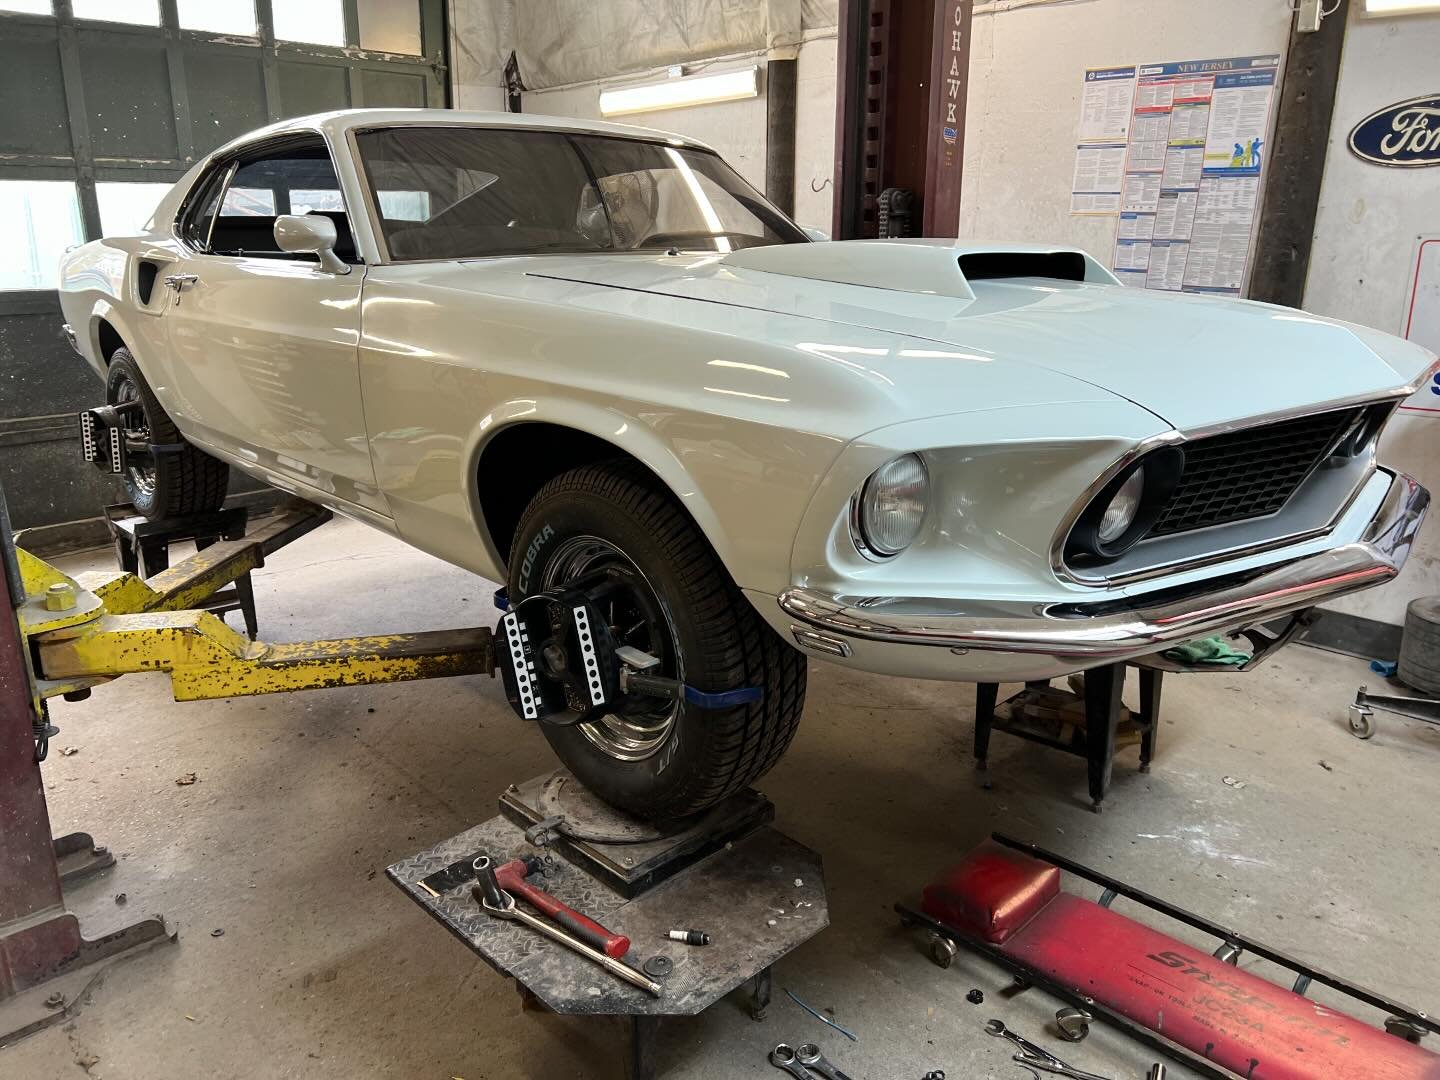 1969 Mustang Sport Roof alignment done car is final assembled and is out putting some miles . John and his wife dated in this car in early years.on#thatgirlwhopaintscars #longvalleyautobody #akzonobelrefinish #lesonal#1969mustangsportsroof